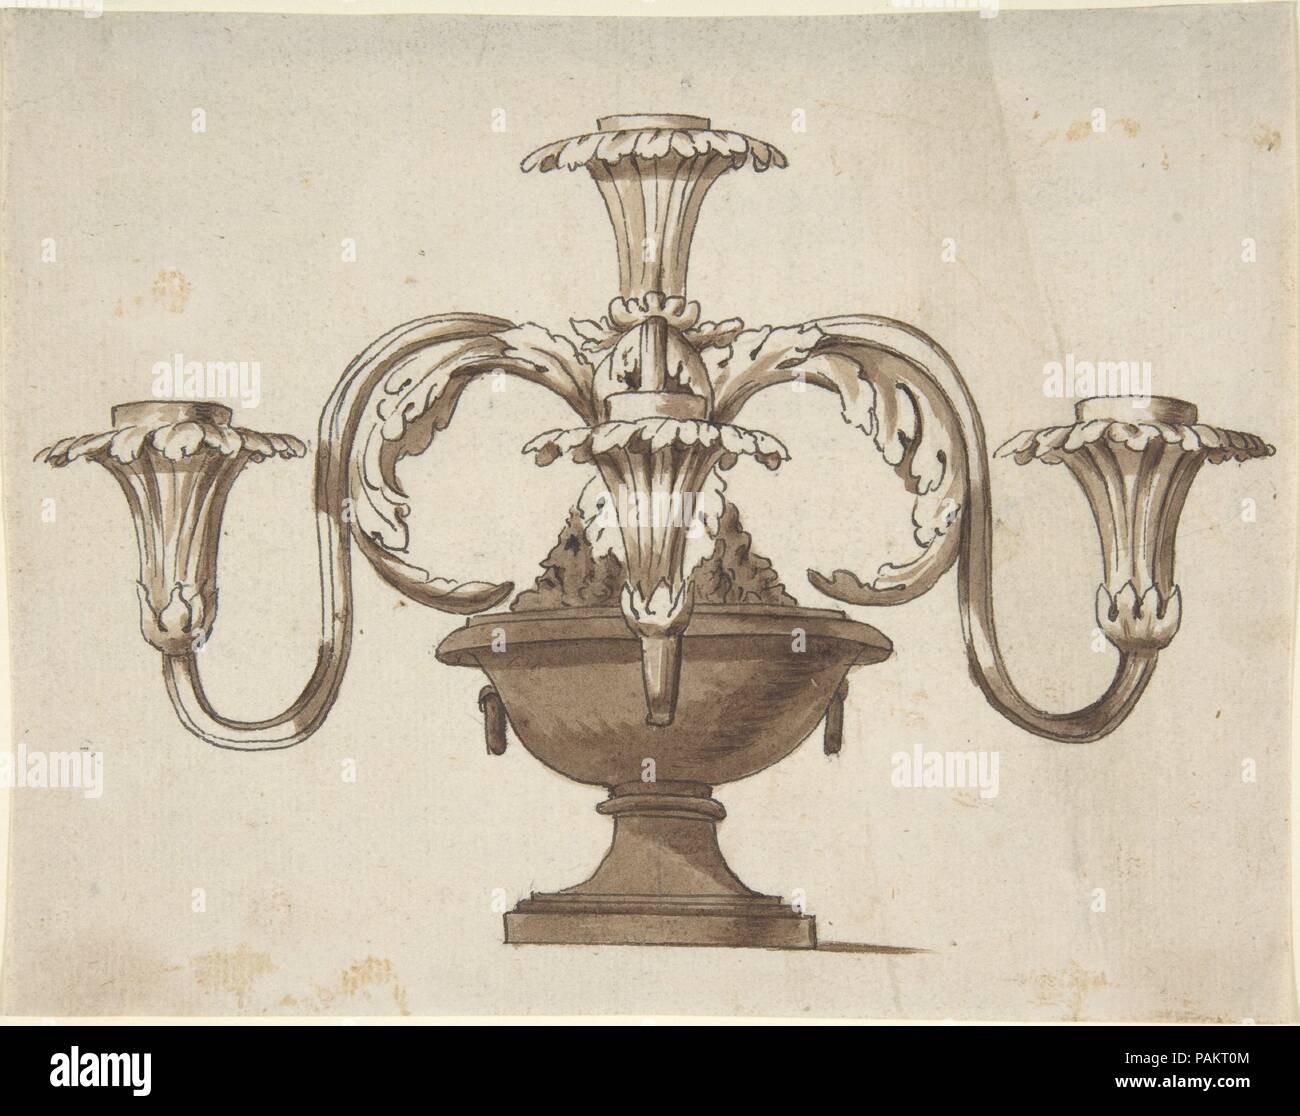 Design for a Candelabra. Artist: Anonymous, Italian, early 19th century. Dimensions: 5-1/8 x 6-1/2 in. Date: early 19th century. Museum: Metropolitan Museum of Art, New York, USA. Stock Photo